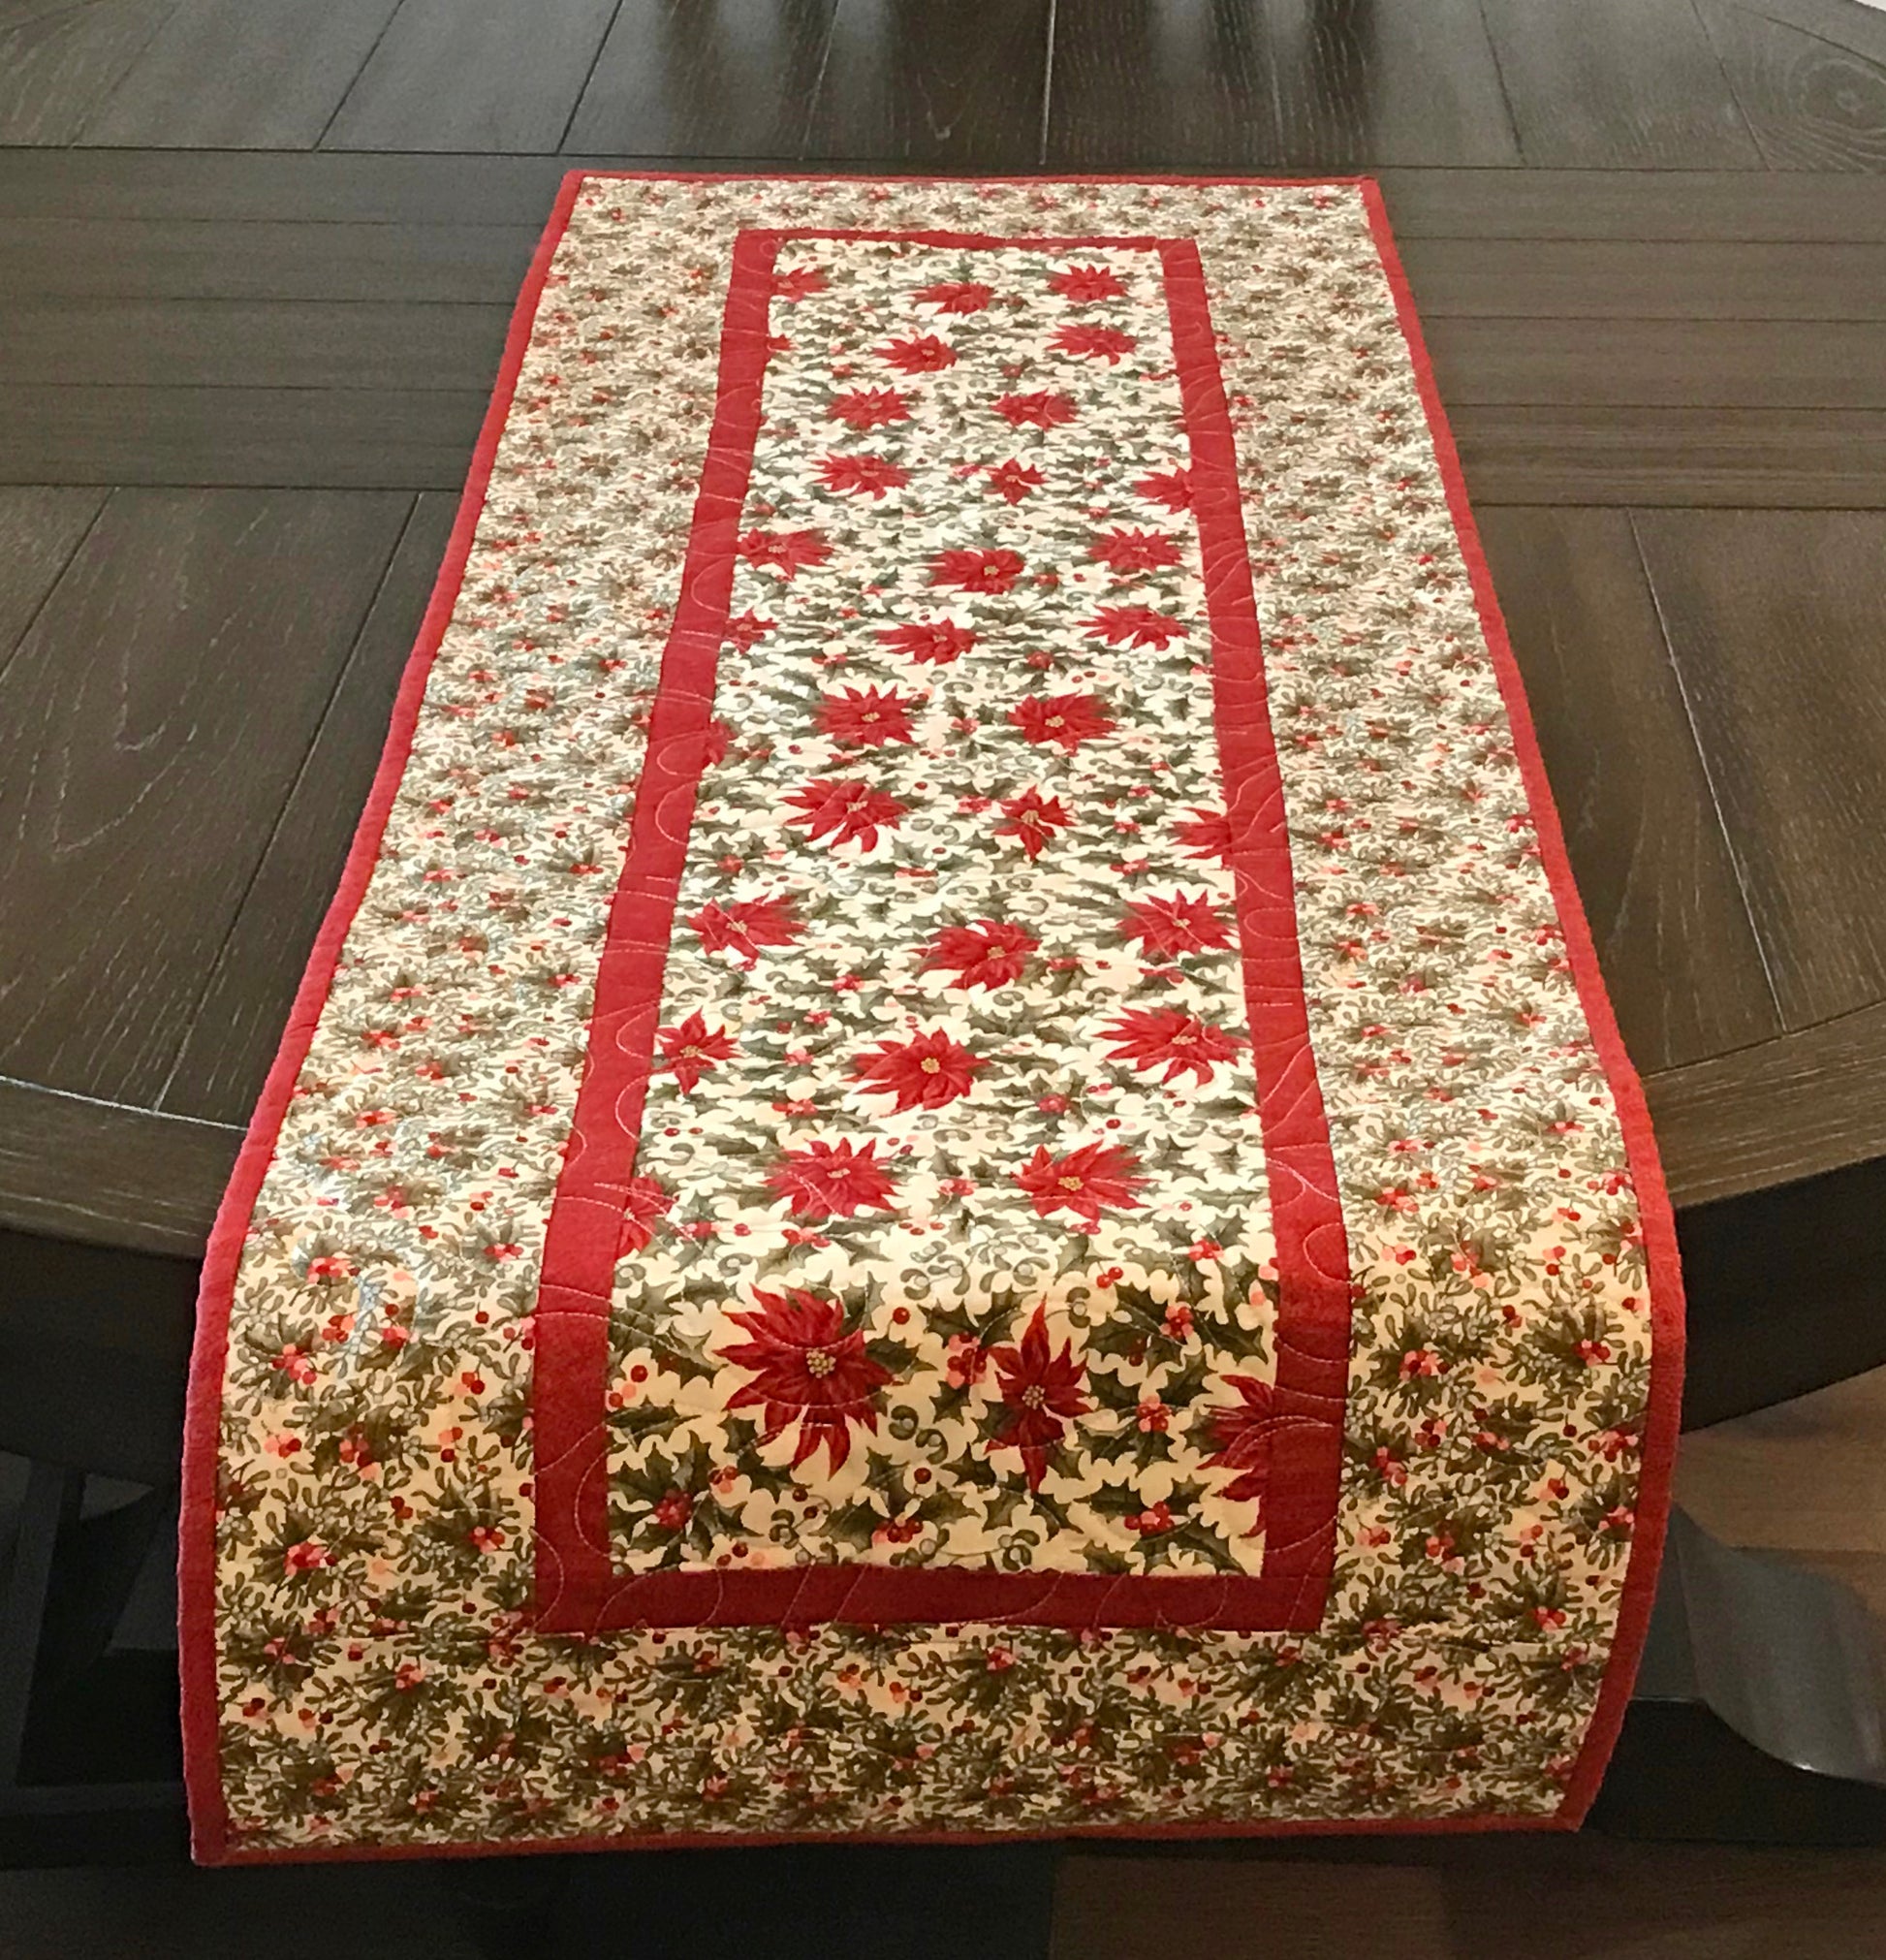 Christmas Poinsettia Table Runner - Handmade Quilts, Digital Patterns, and Home Décor items online - Cuddle Cat Quiltworks